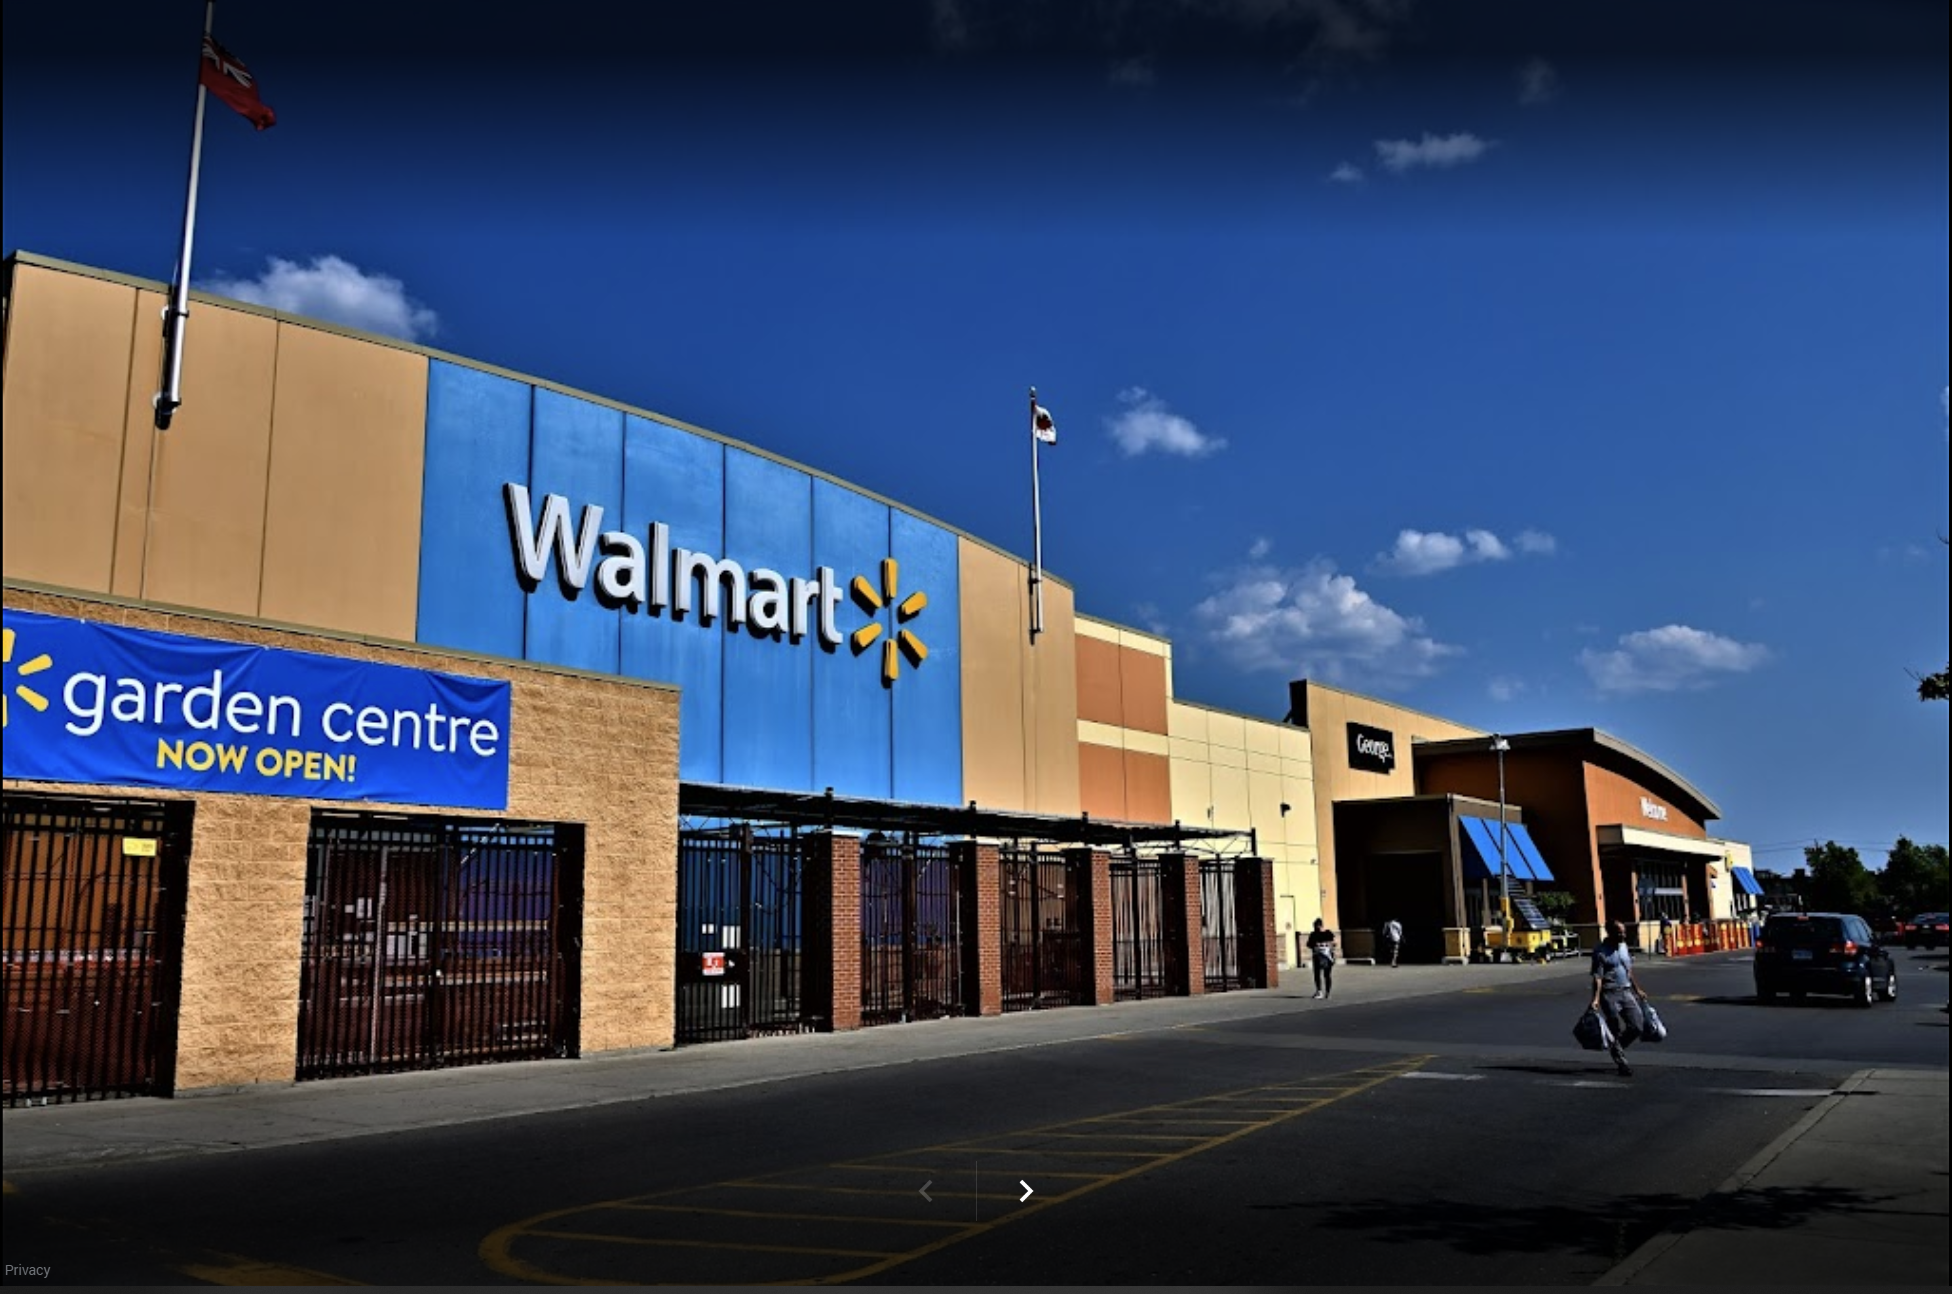 Toronto Police urged to investigate assault on Muslim woman at Walmart as possible hate crime